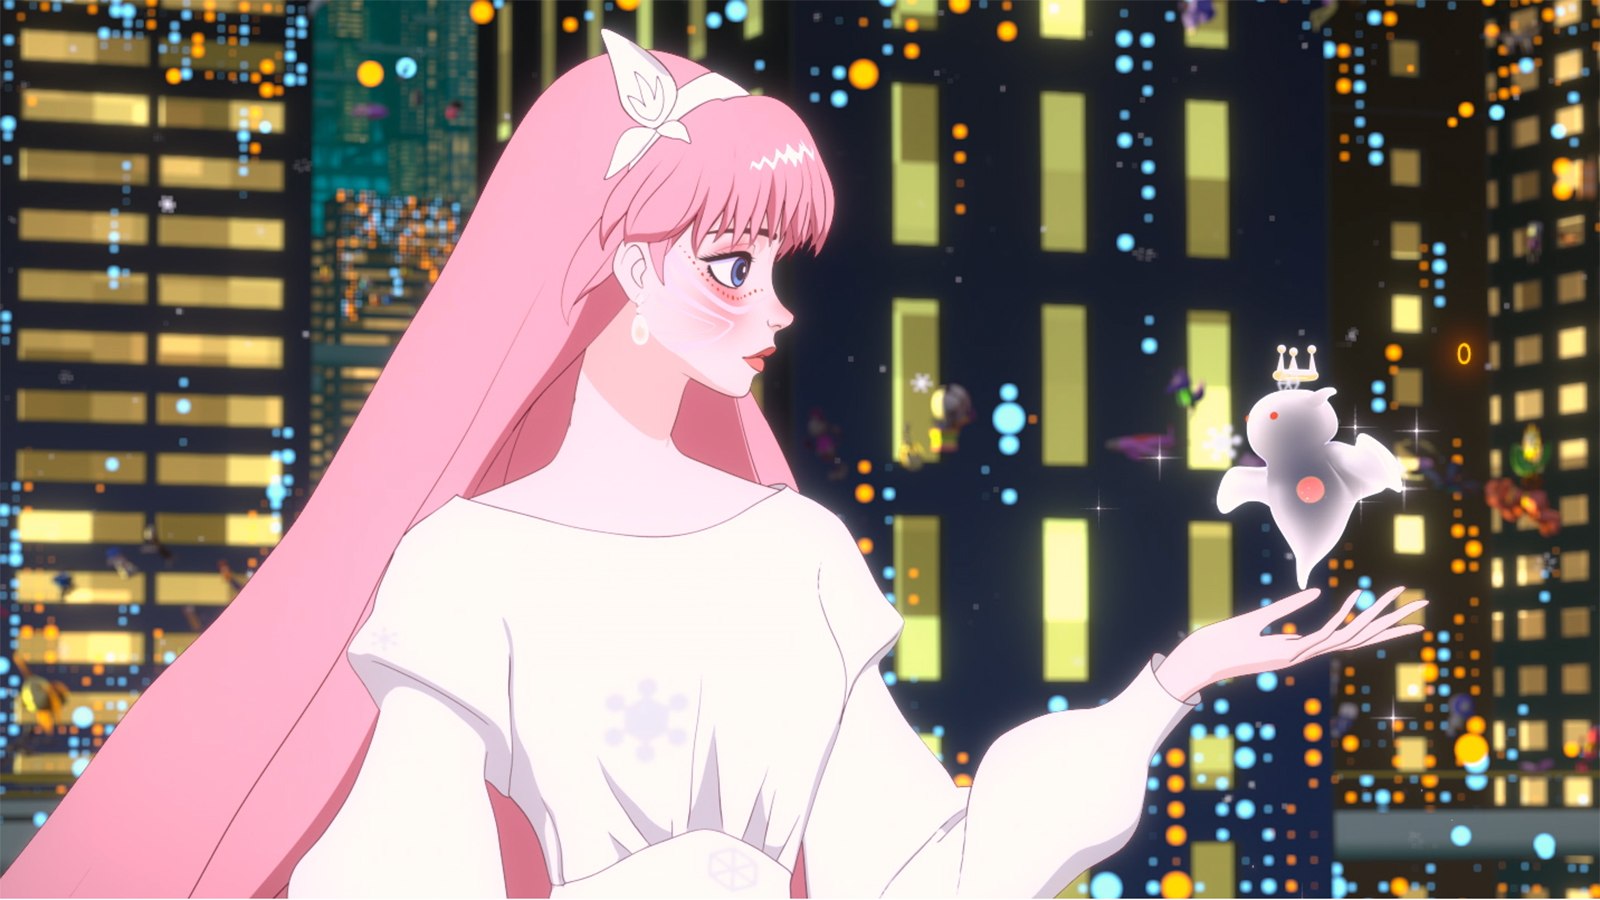 Image from animated film Belle of character with long pink hair against cityscape